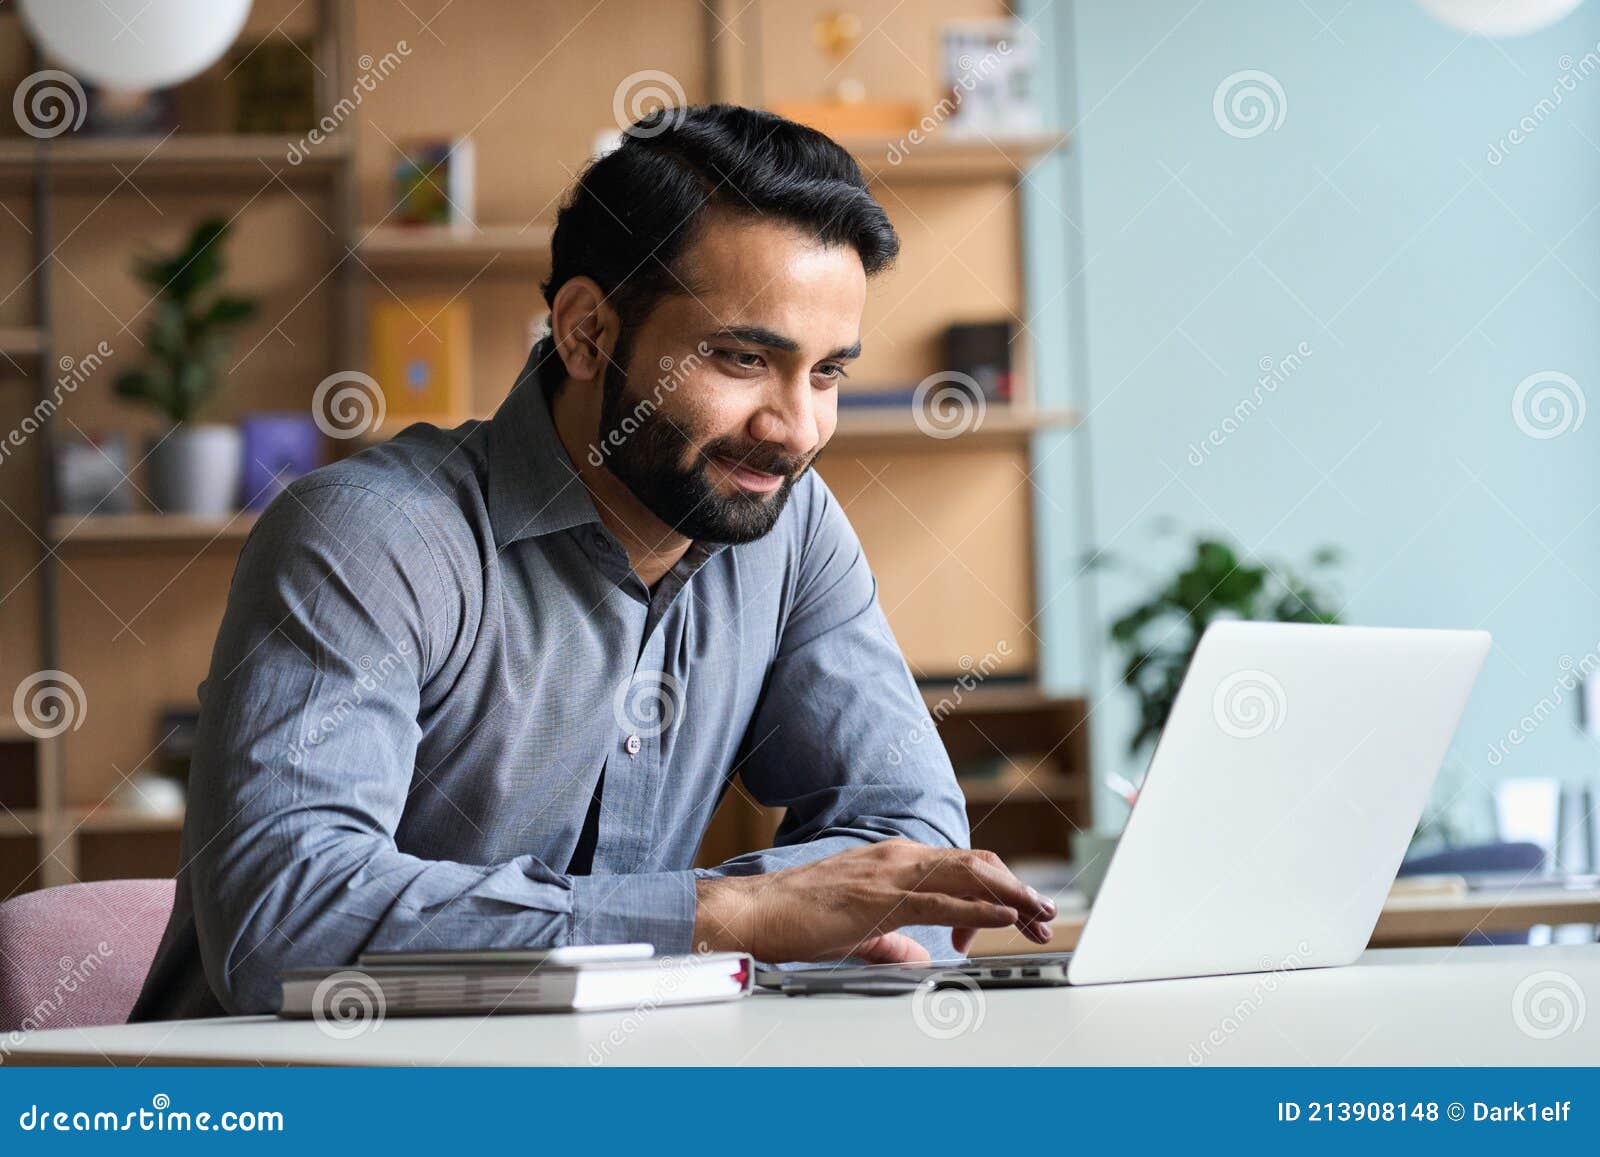 smiling indian business man working studying on laptop computer at home office.